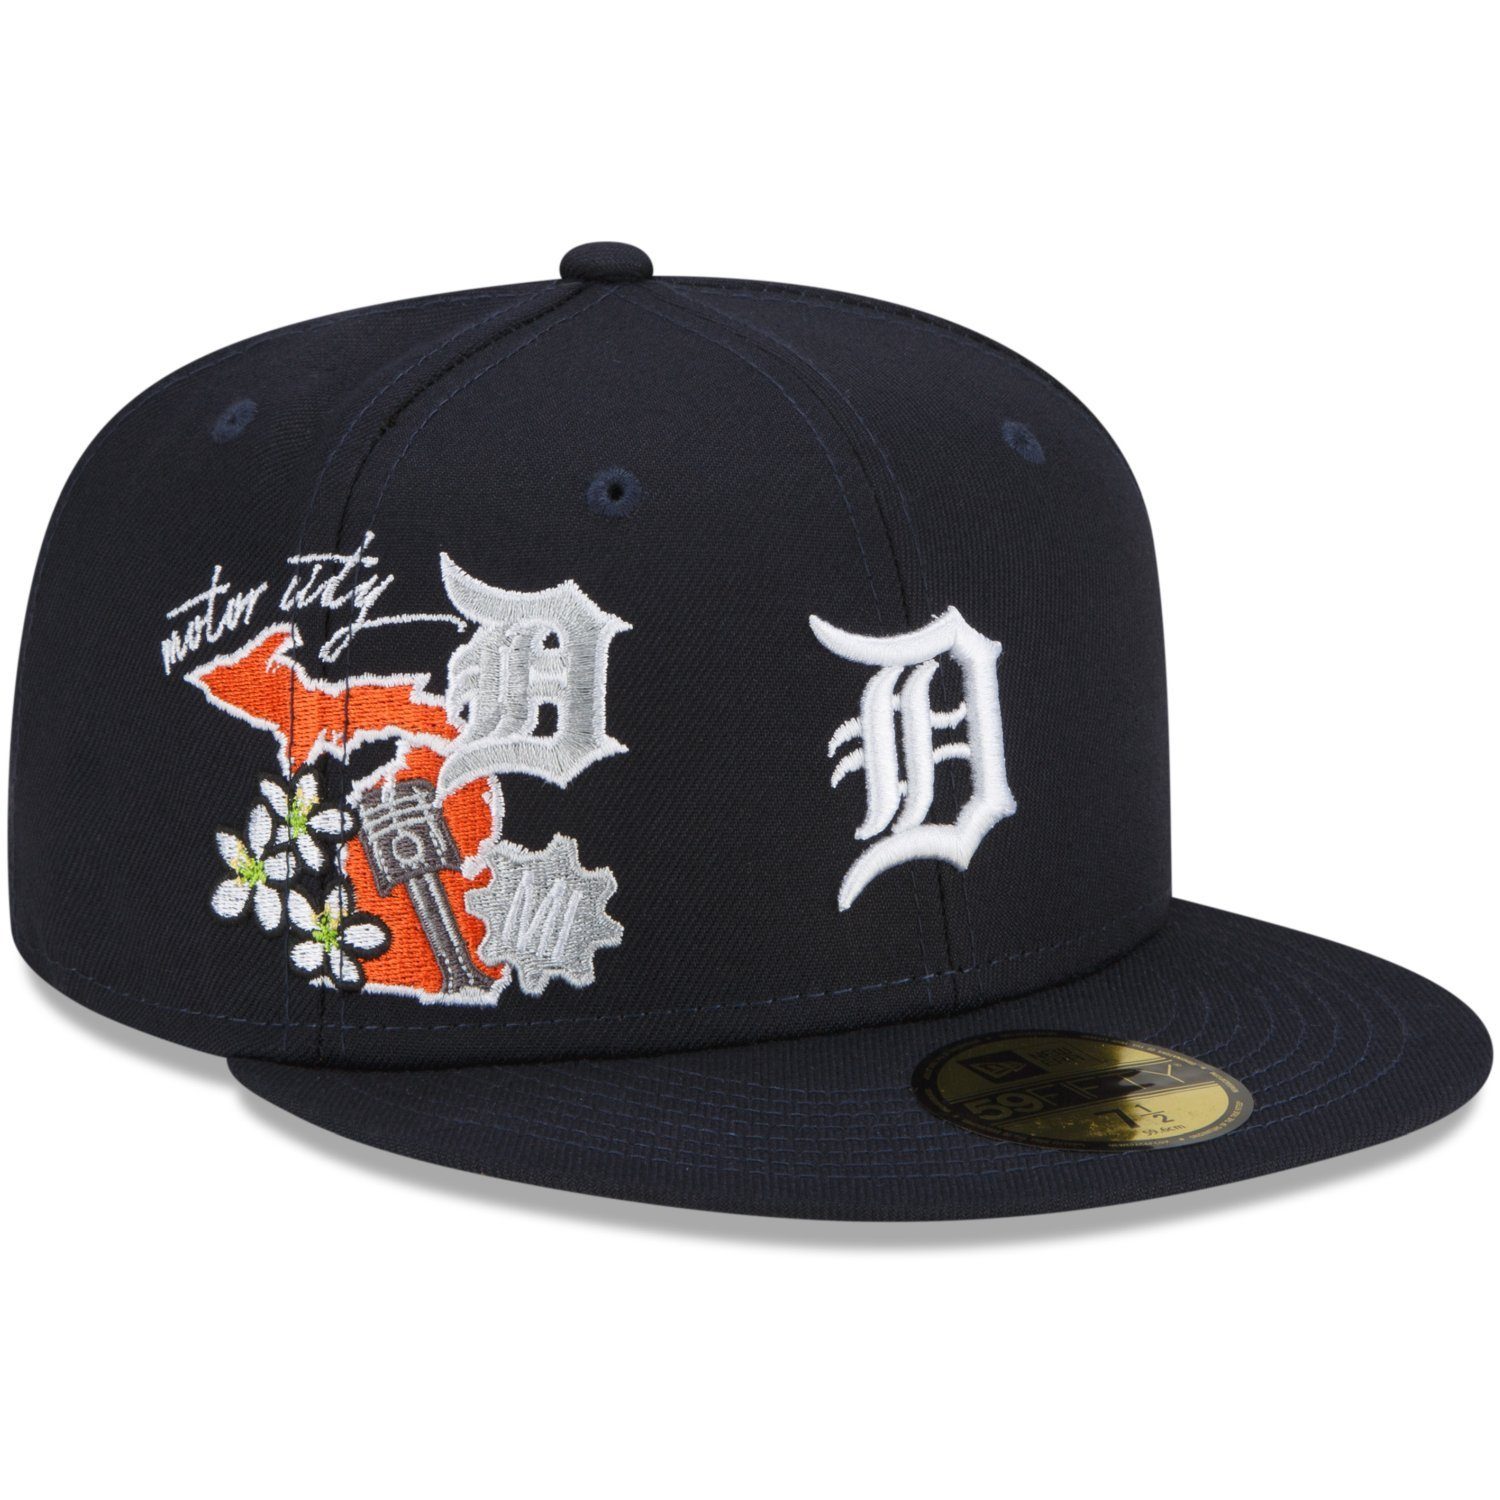 New Era Fitted Cap 59Fifty CITY CLUSTER Detroit Tigers